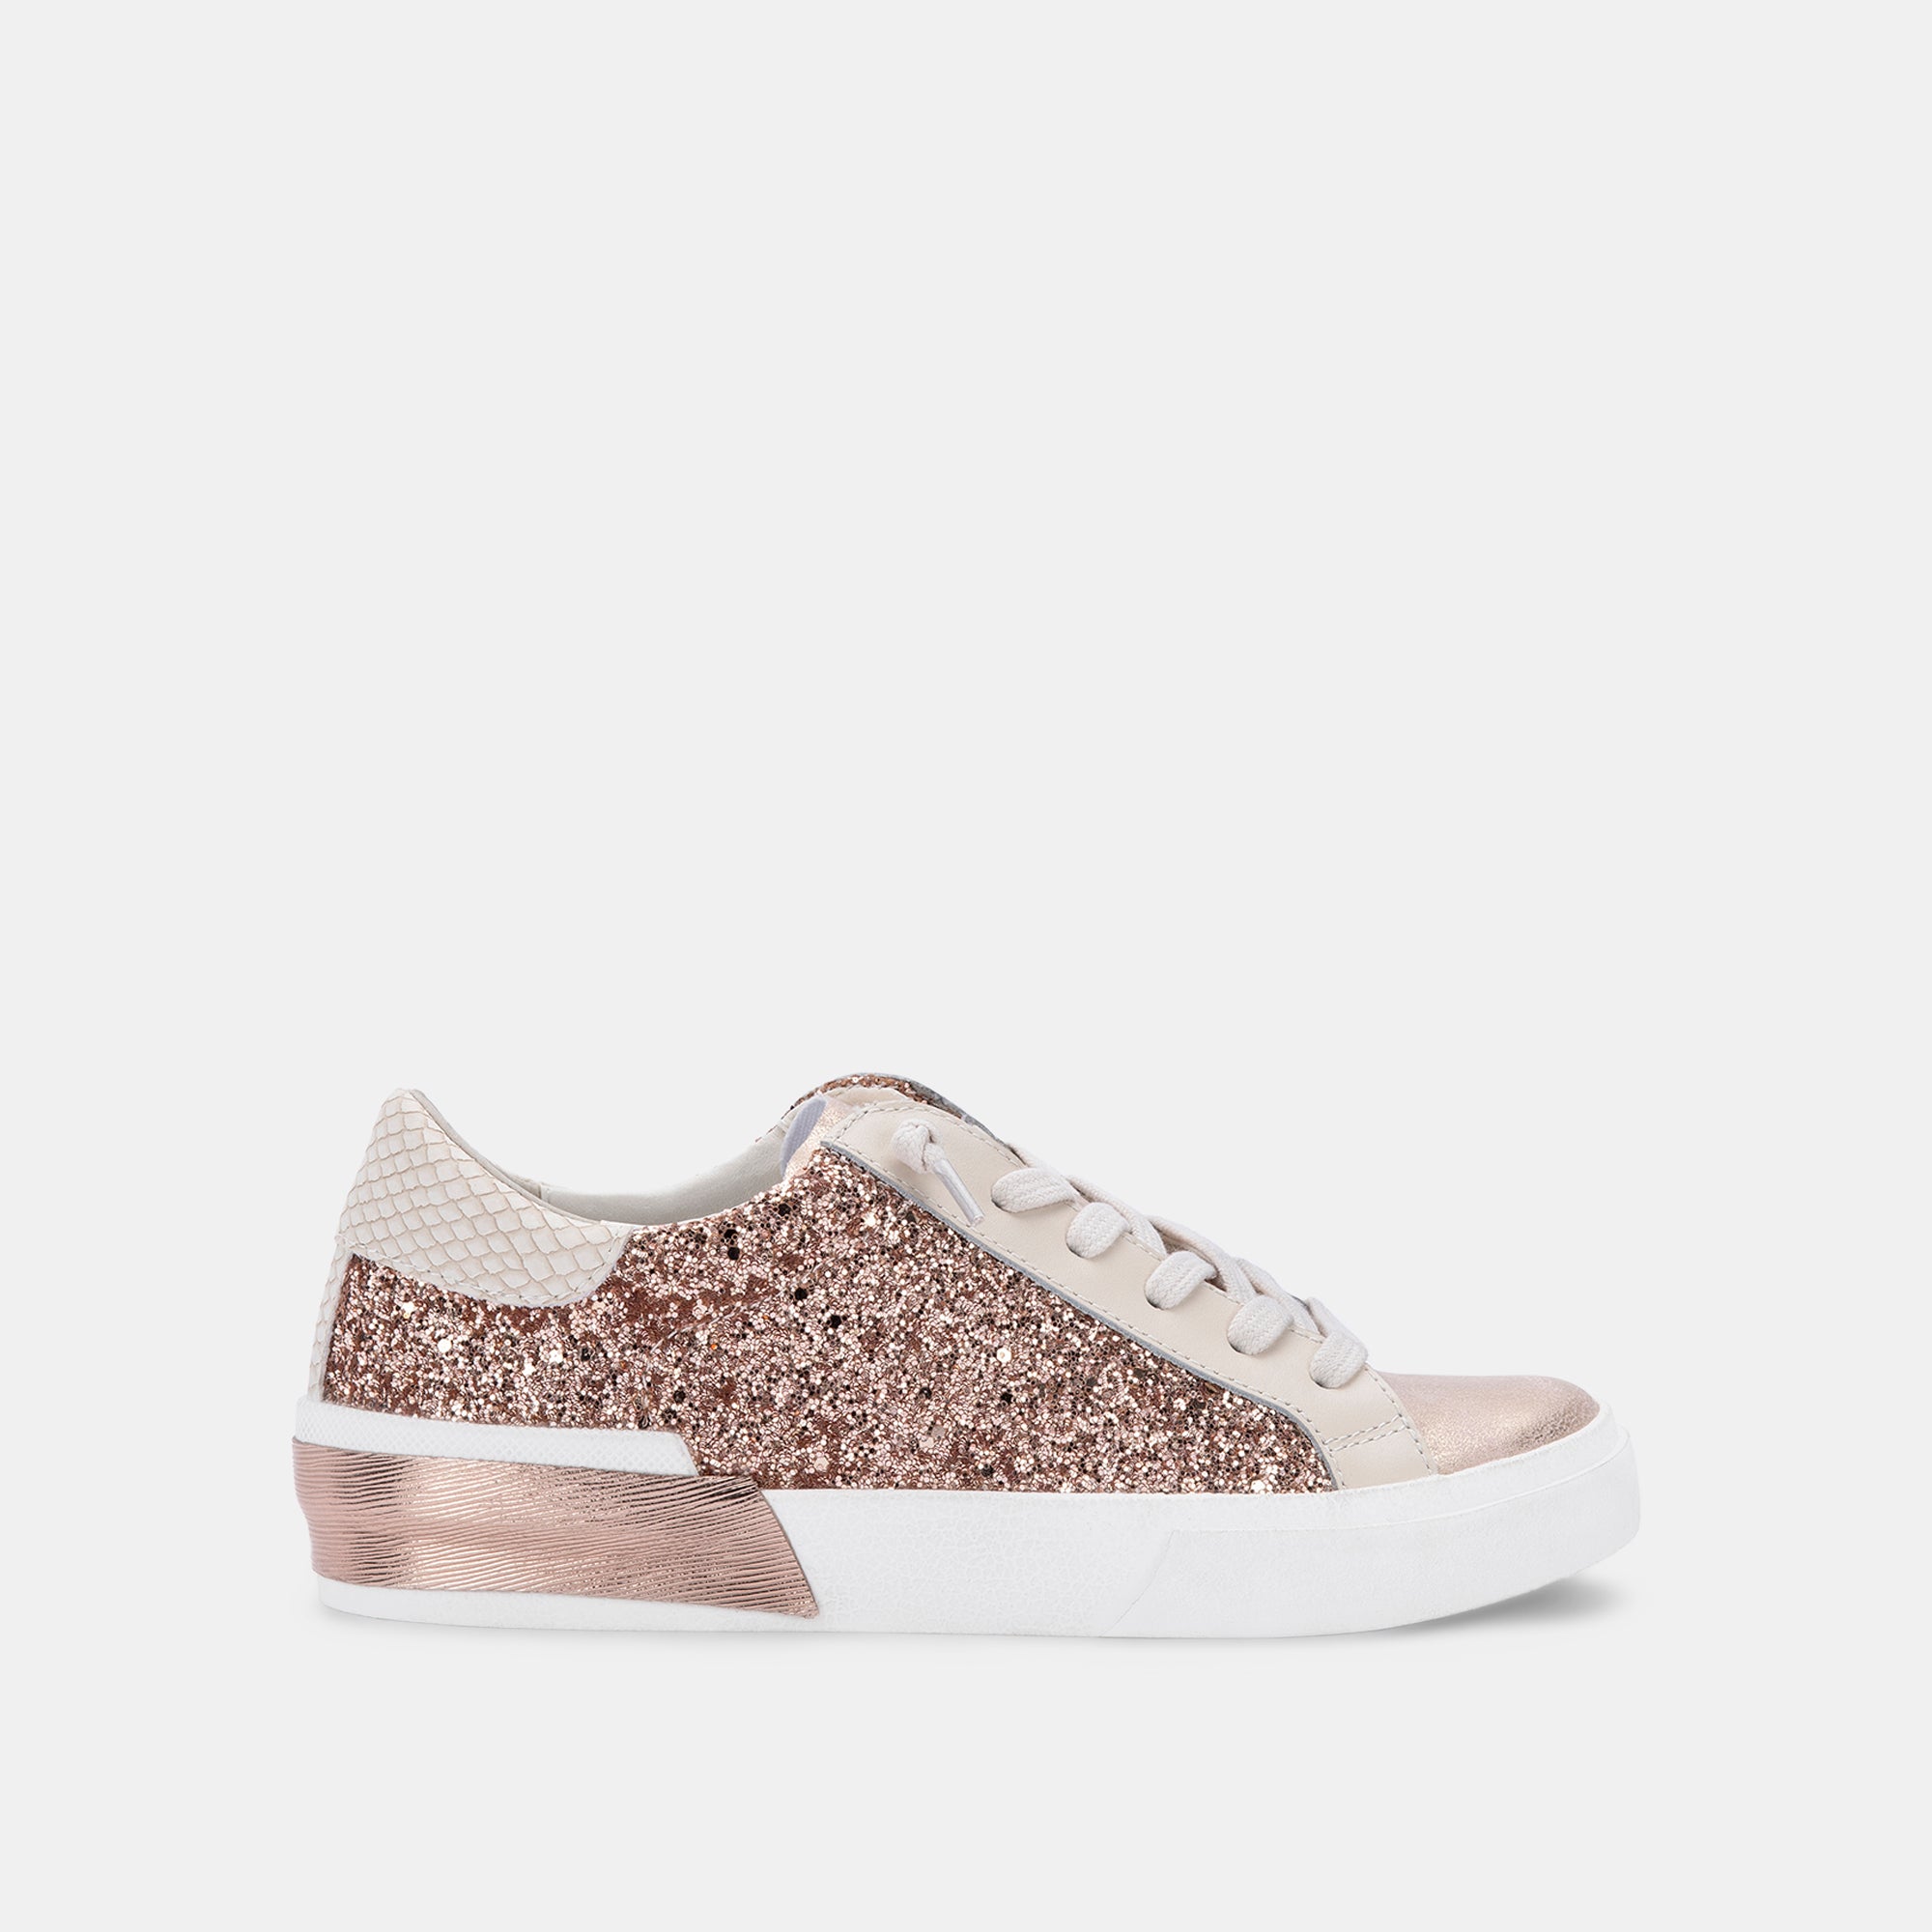 Sparkle Sneakers Women, Silver Sequin Canvas Sneakers, Wedding